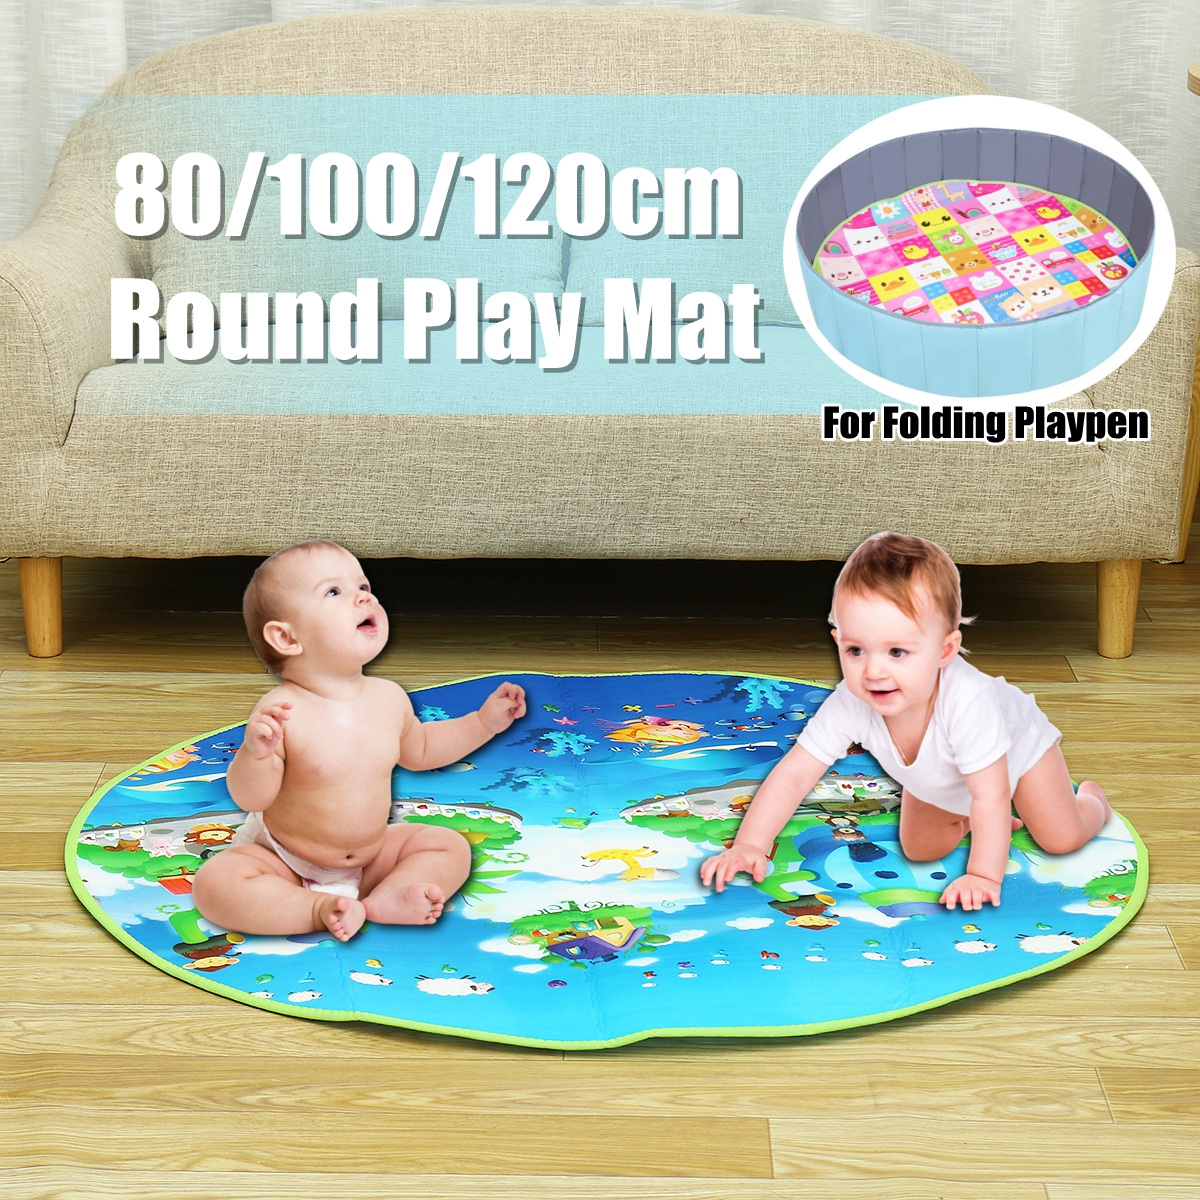 1cm-Thick-Dia-80100120cm-Baby-Crawling-Play-Mat-Educational-Alphabet-Game-Rug-For-Children-Puzzle-Ac-1632147-1